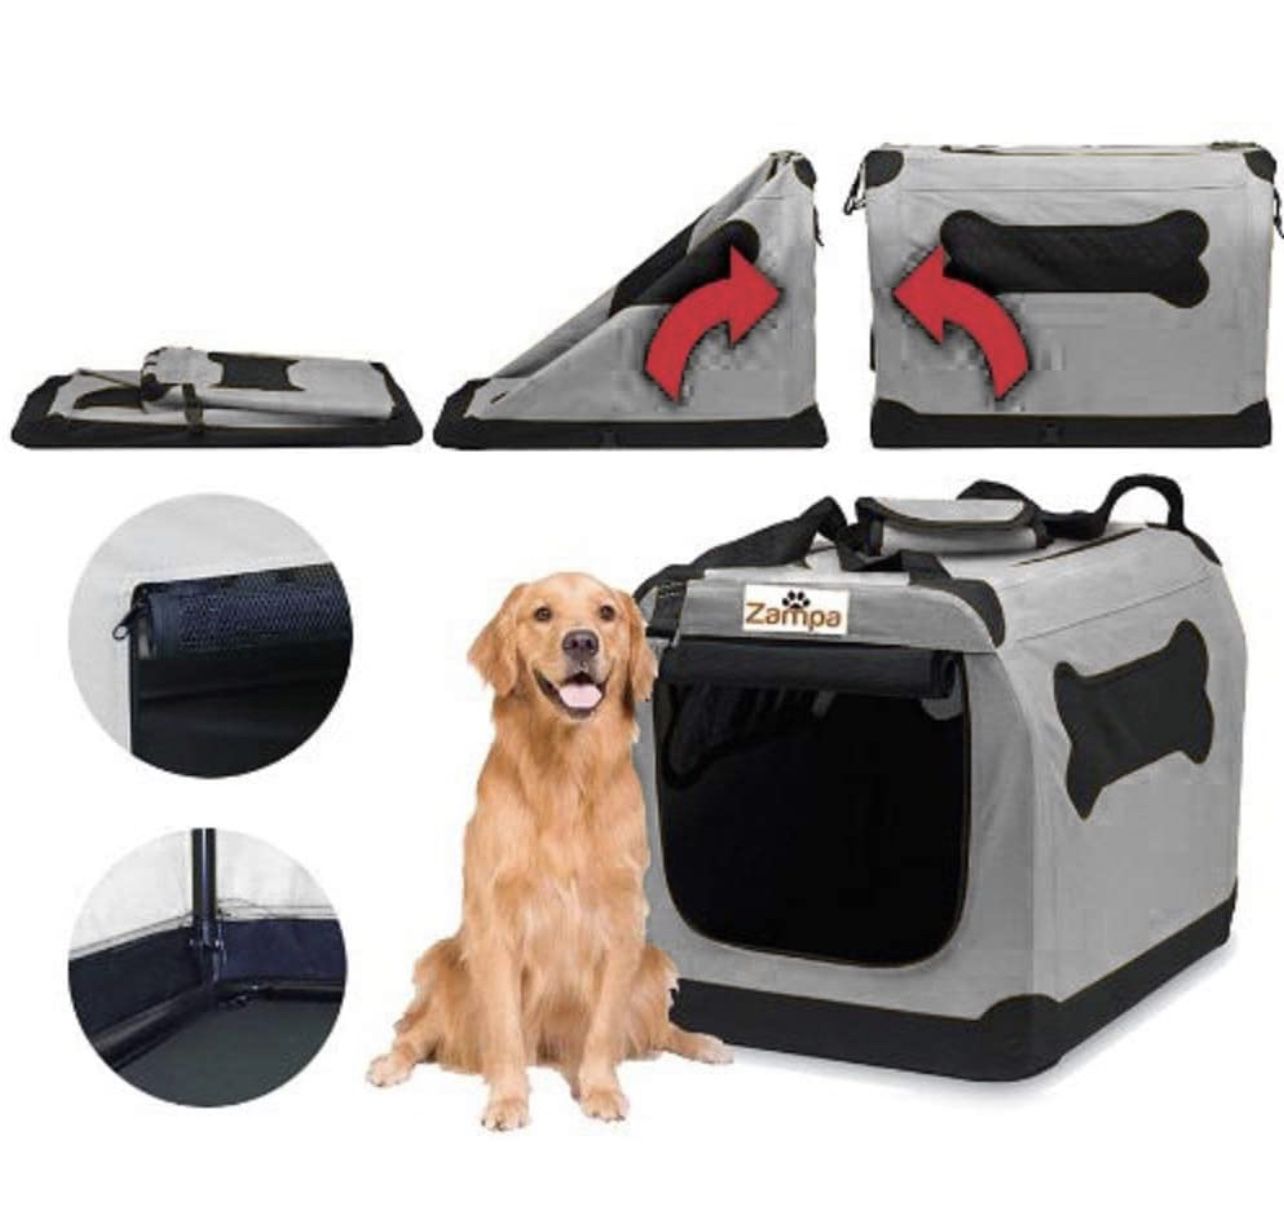 Pet Portable Crate – Great for Travel, Home and Outdoor – for Dog’s, Cat’s and Puppies – Comes with A Carrying Case